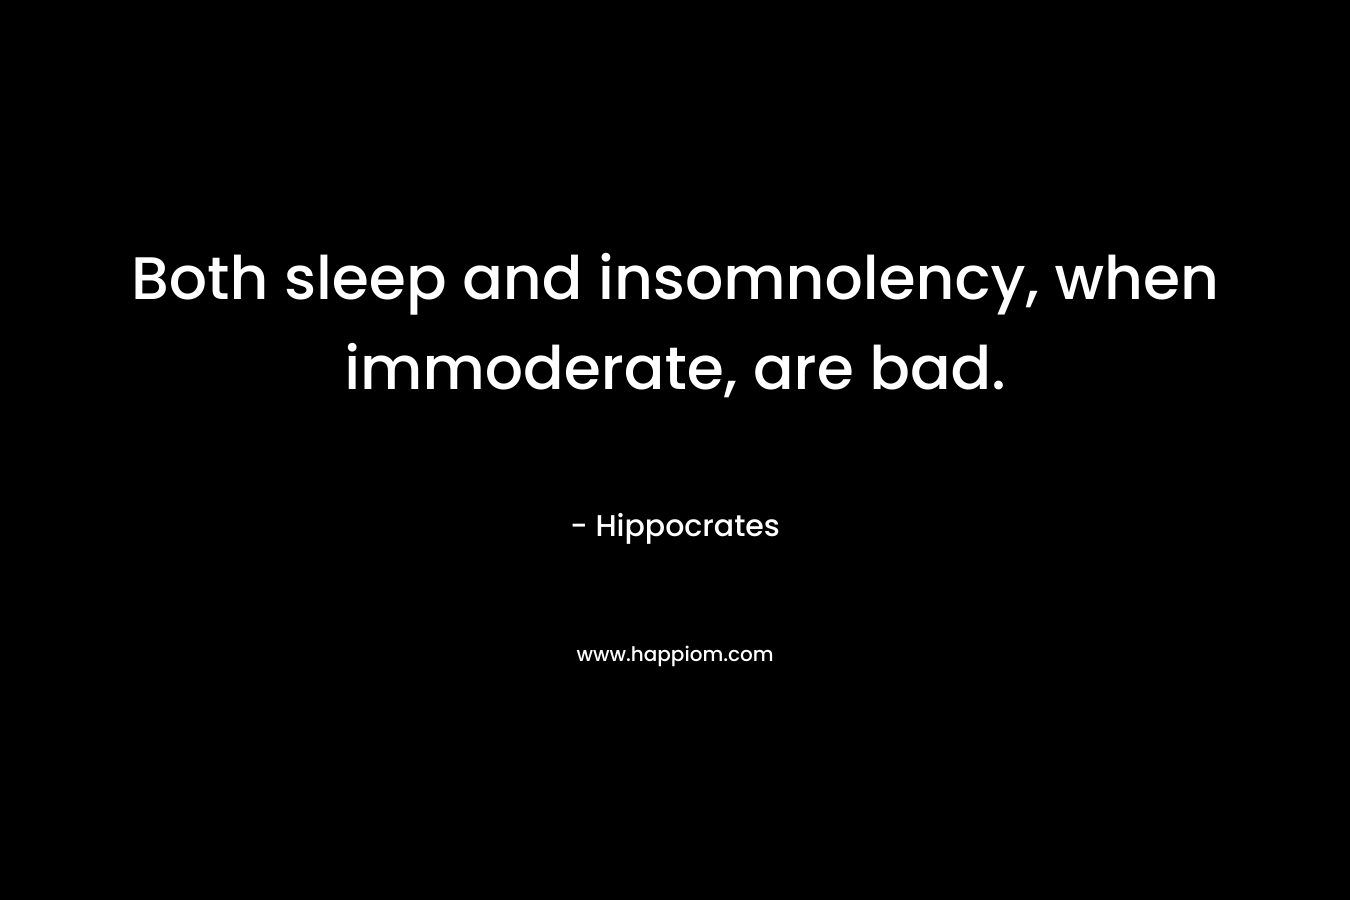 Both sleep and insomnolency, when immoderate, are bad. – Hippocrates